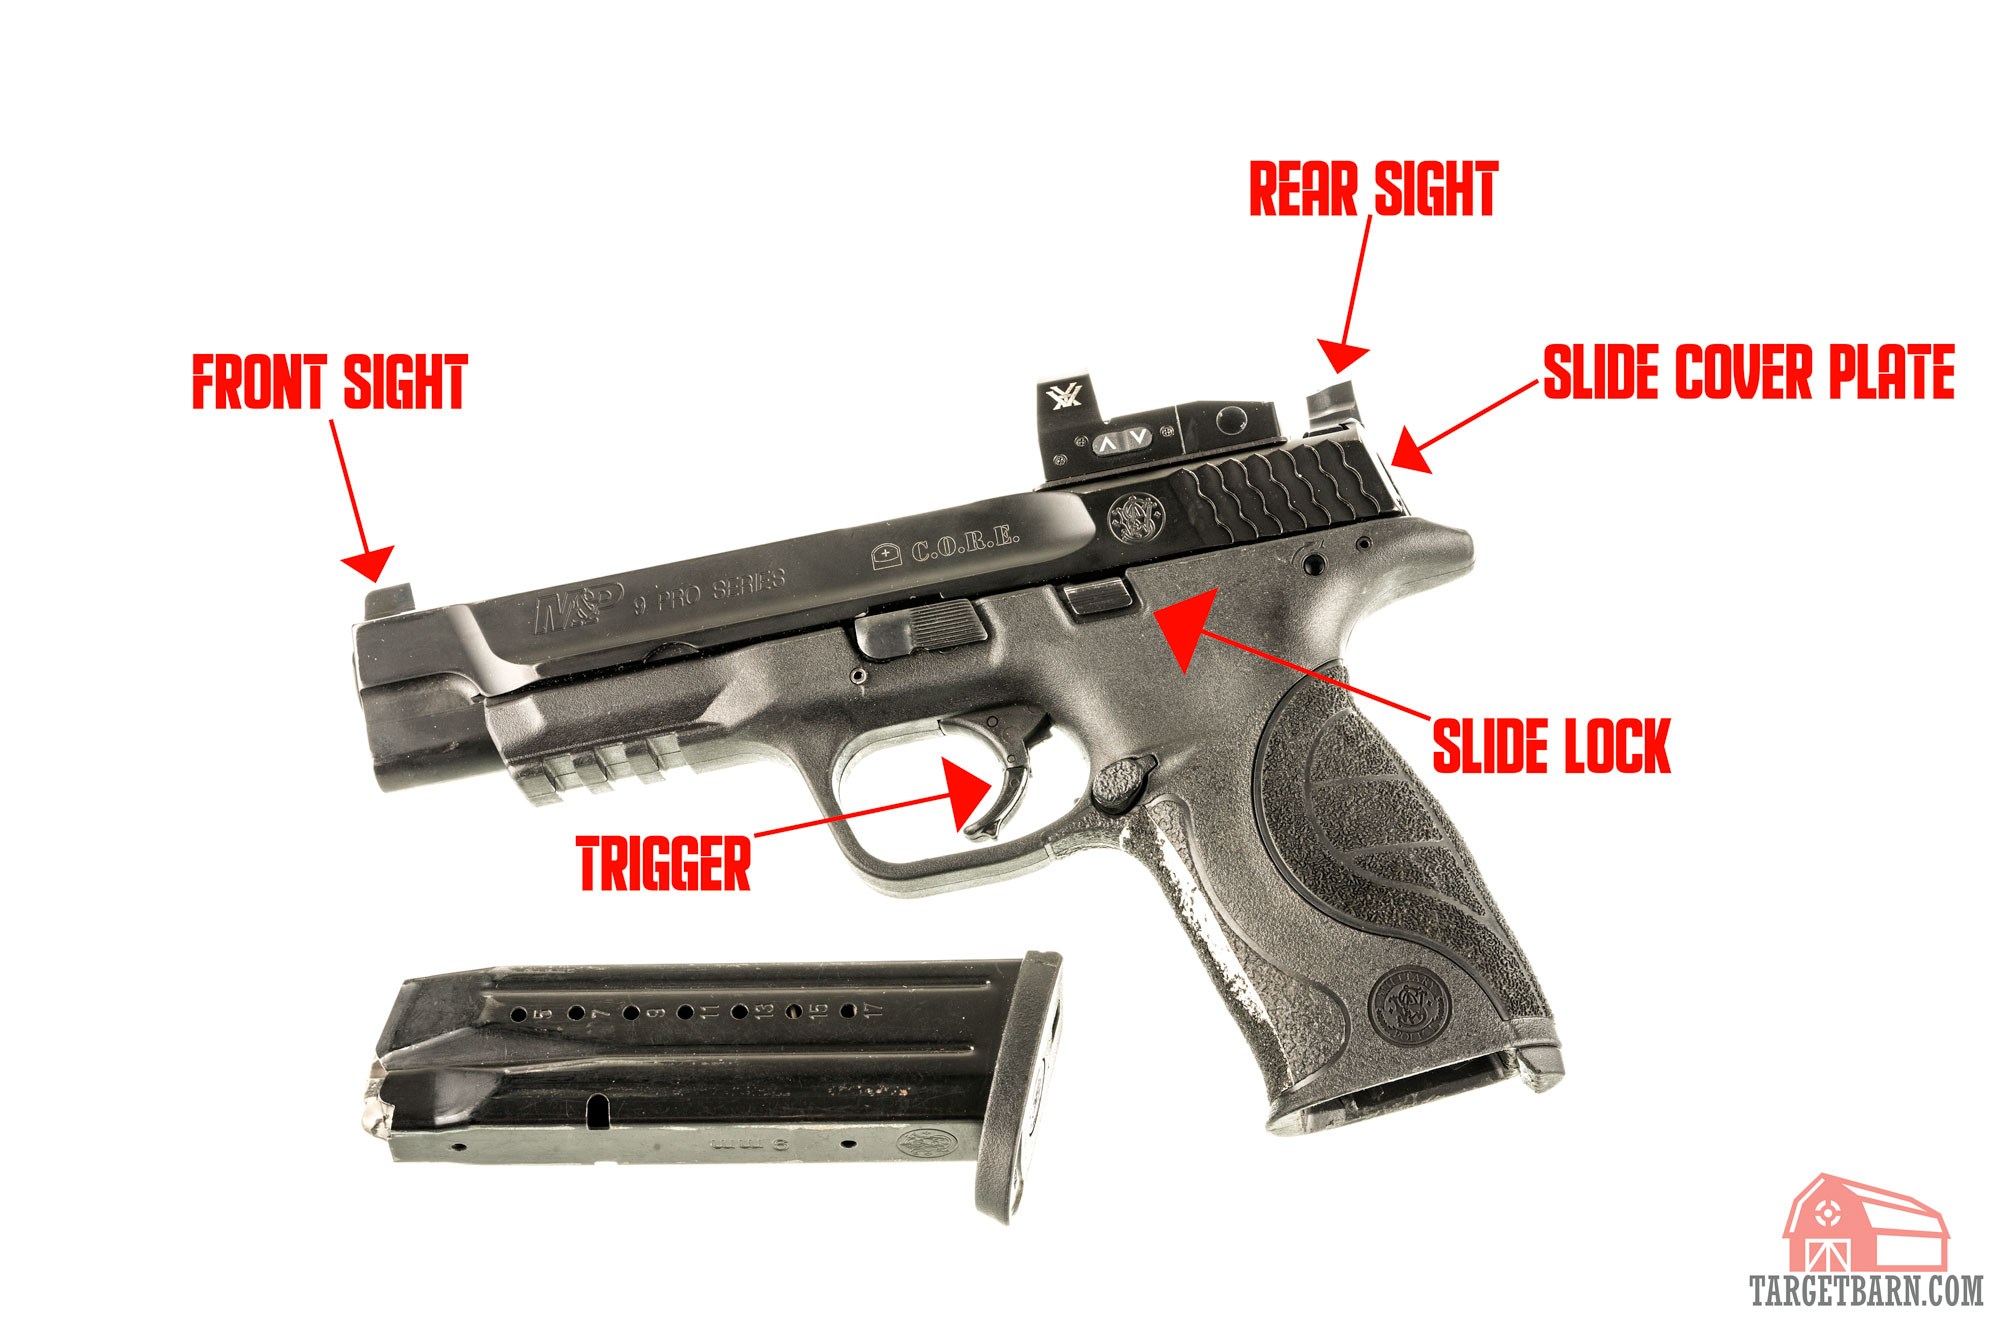 a diagram of the parts of a pistol slide including front sight, rear sight, slide cover plate, trigger, and slide lock